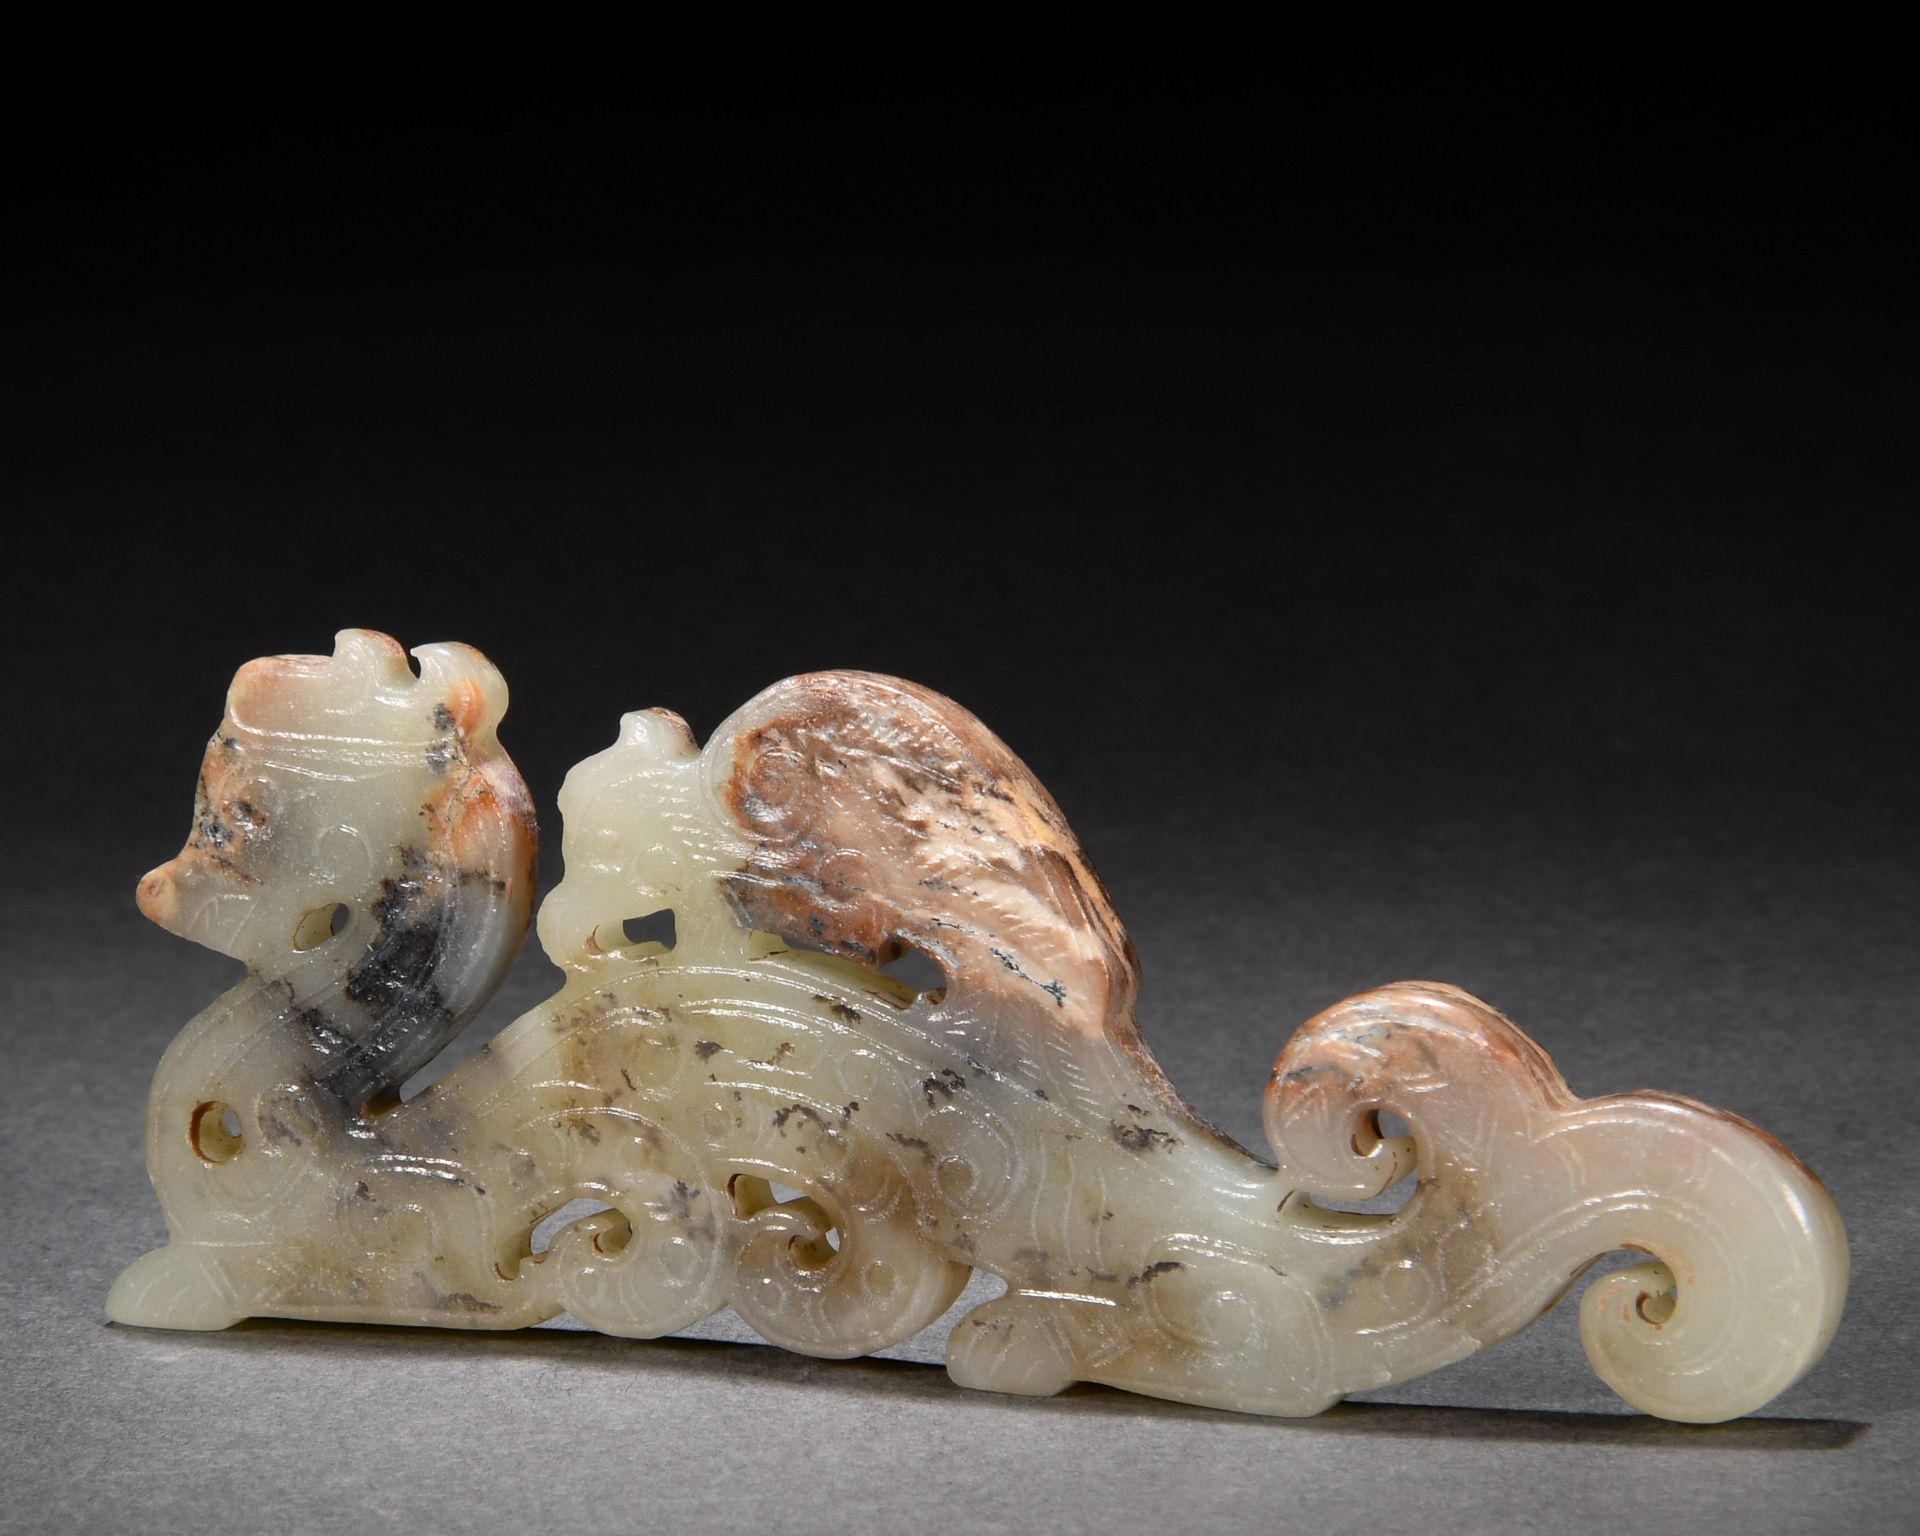 A Chinese Carved Jade Dragon Ornament - Image 4 of 7